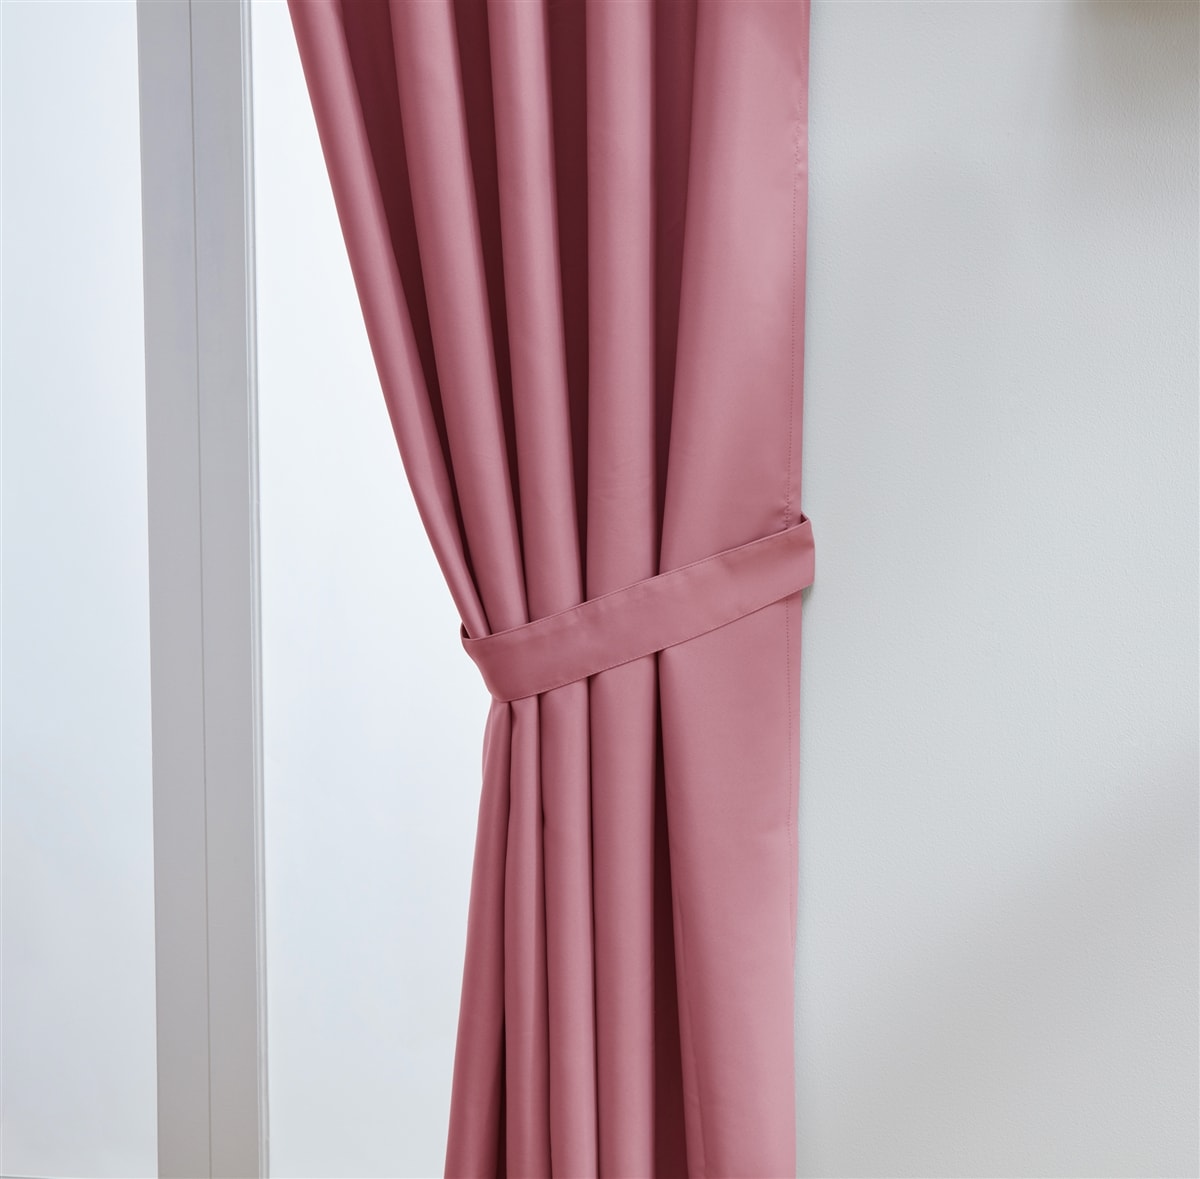 Thermal Blackout Ready Made Eyelet Curtains + Tie Backs (Pink)